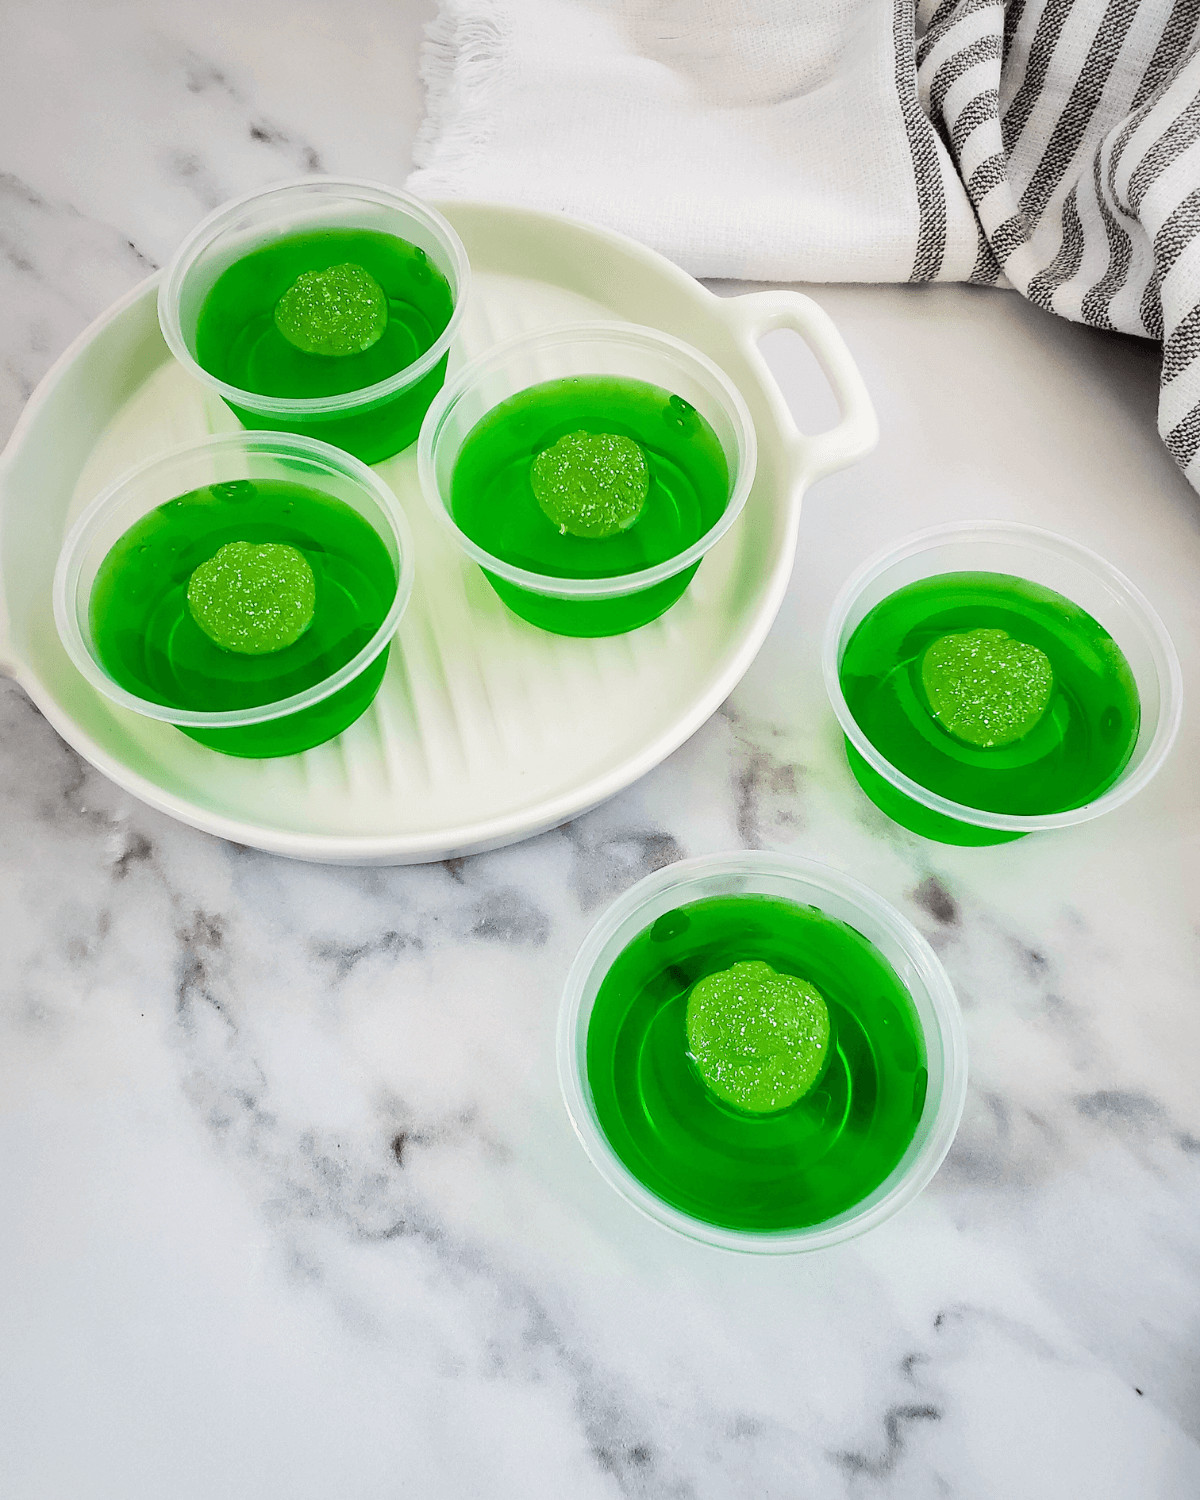 Green shots on a white tray.